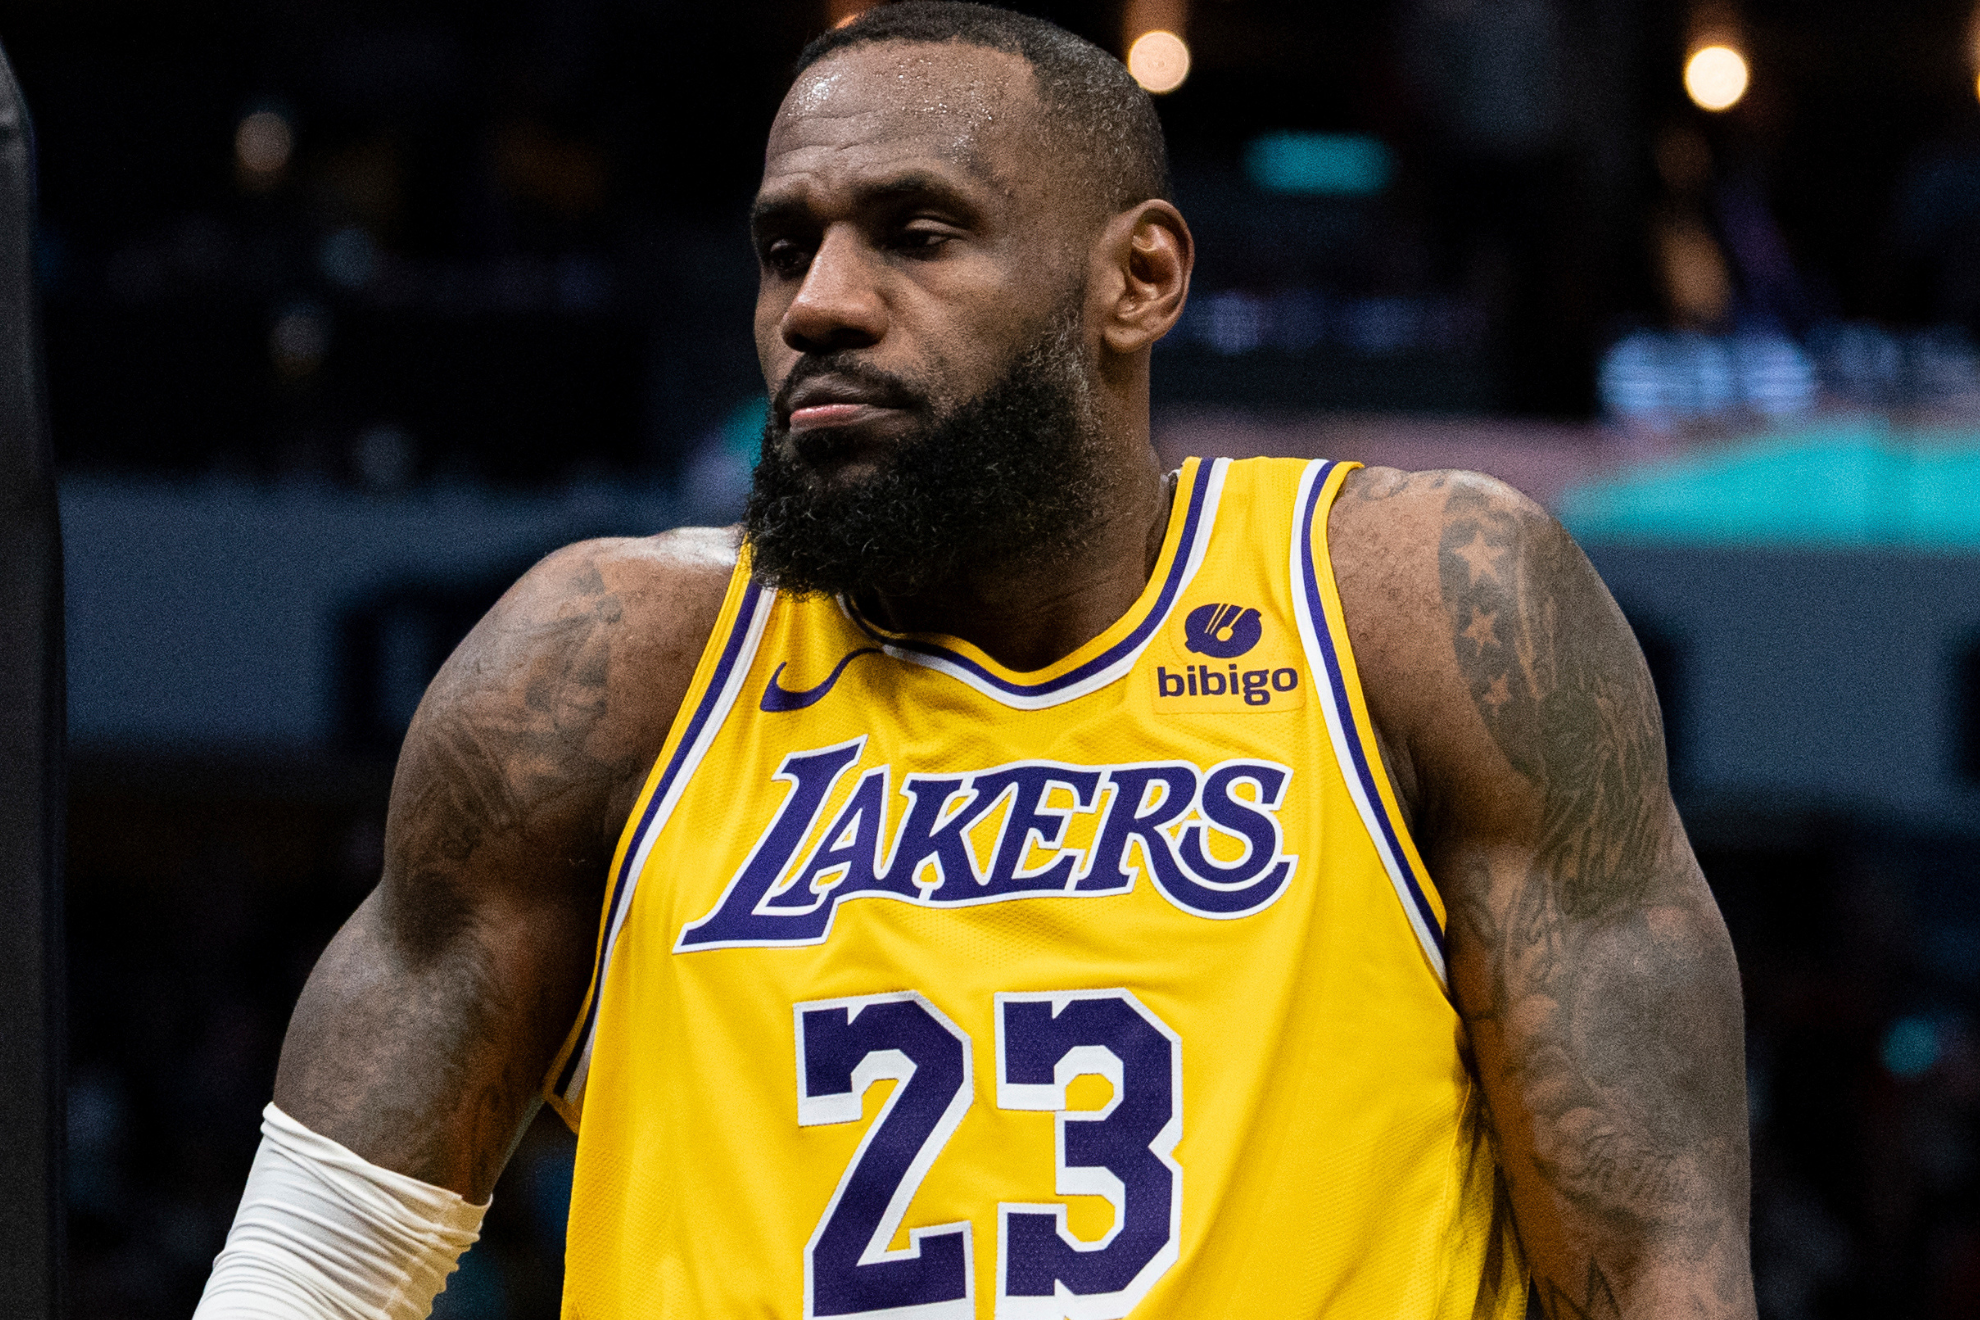 LeBron and the Lakers are in a heated playoff race.